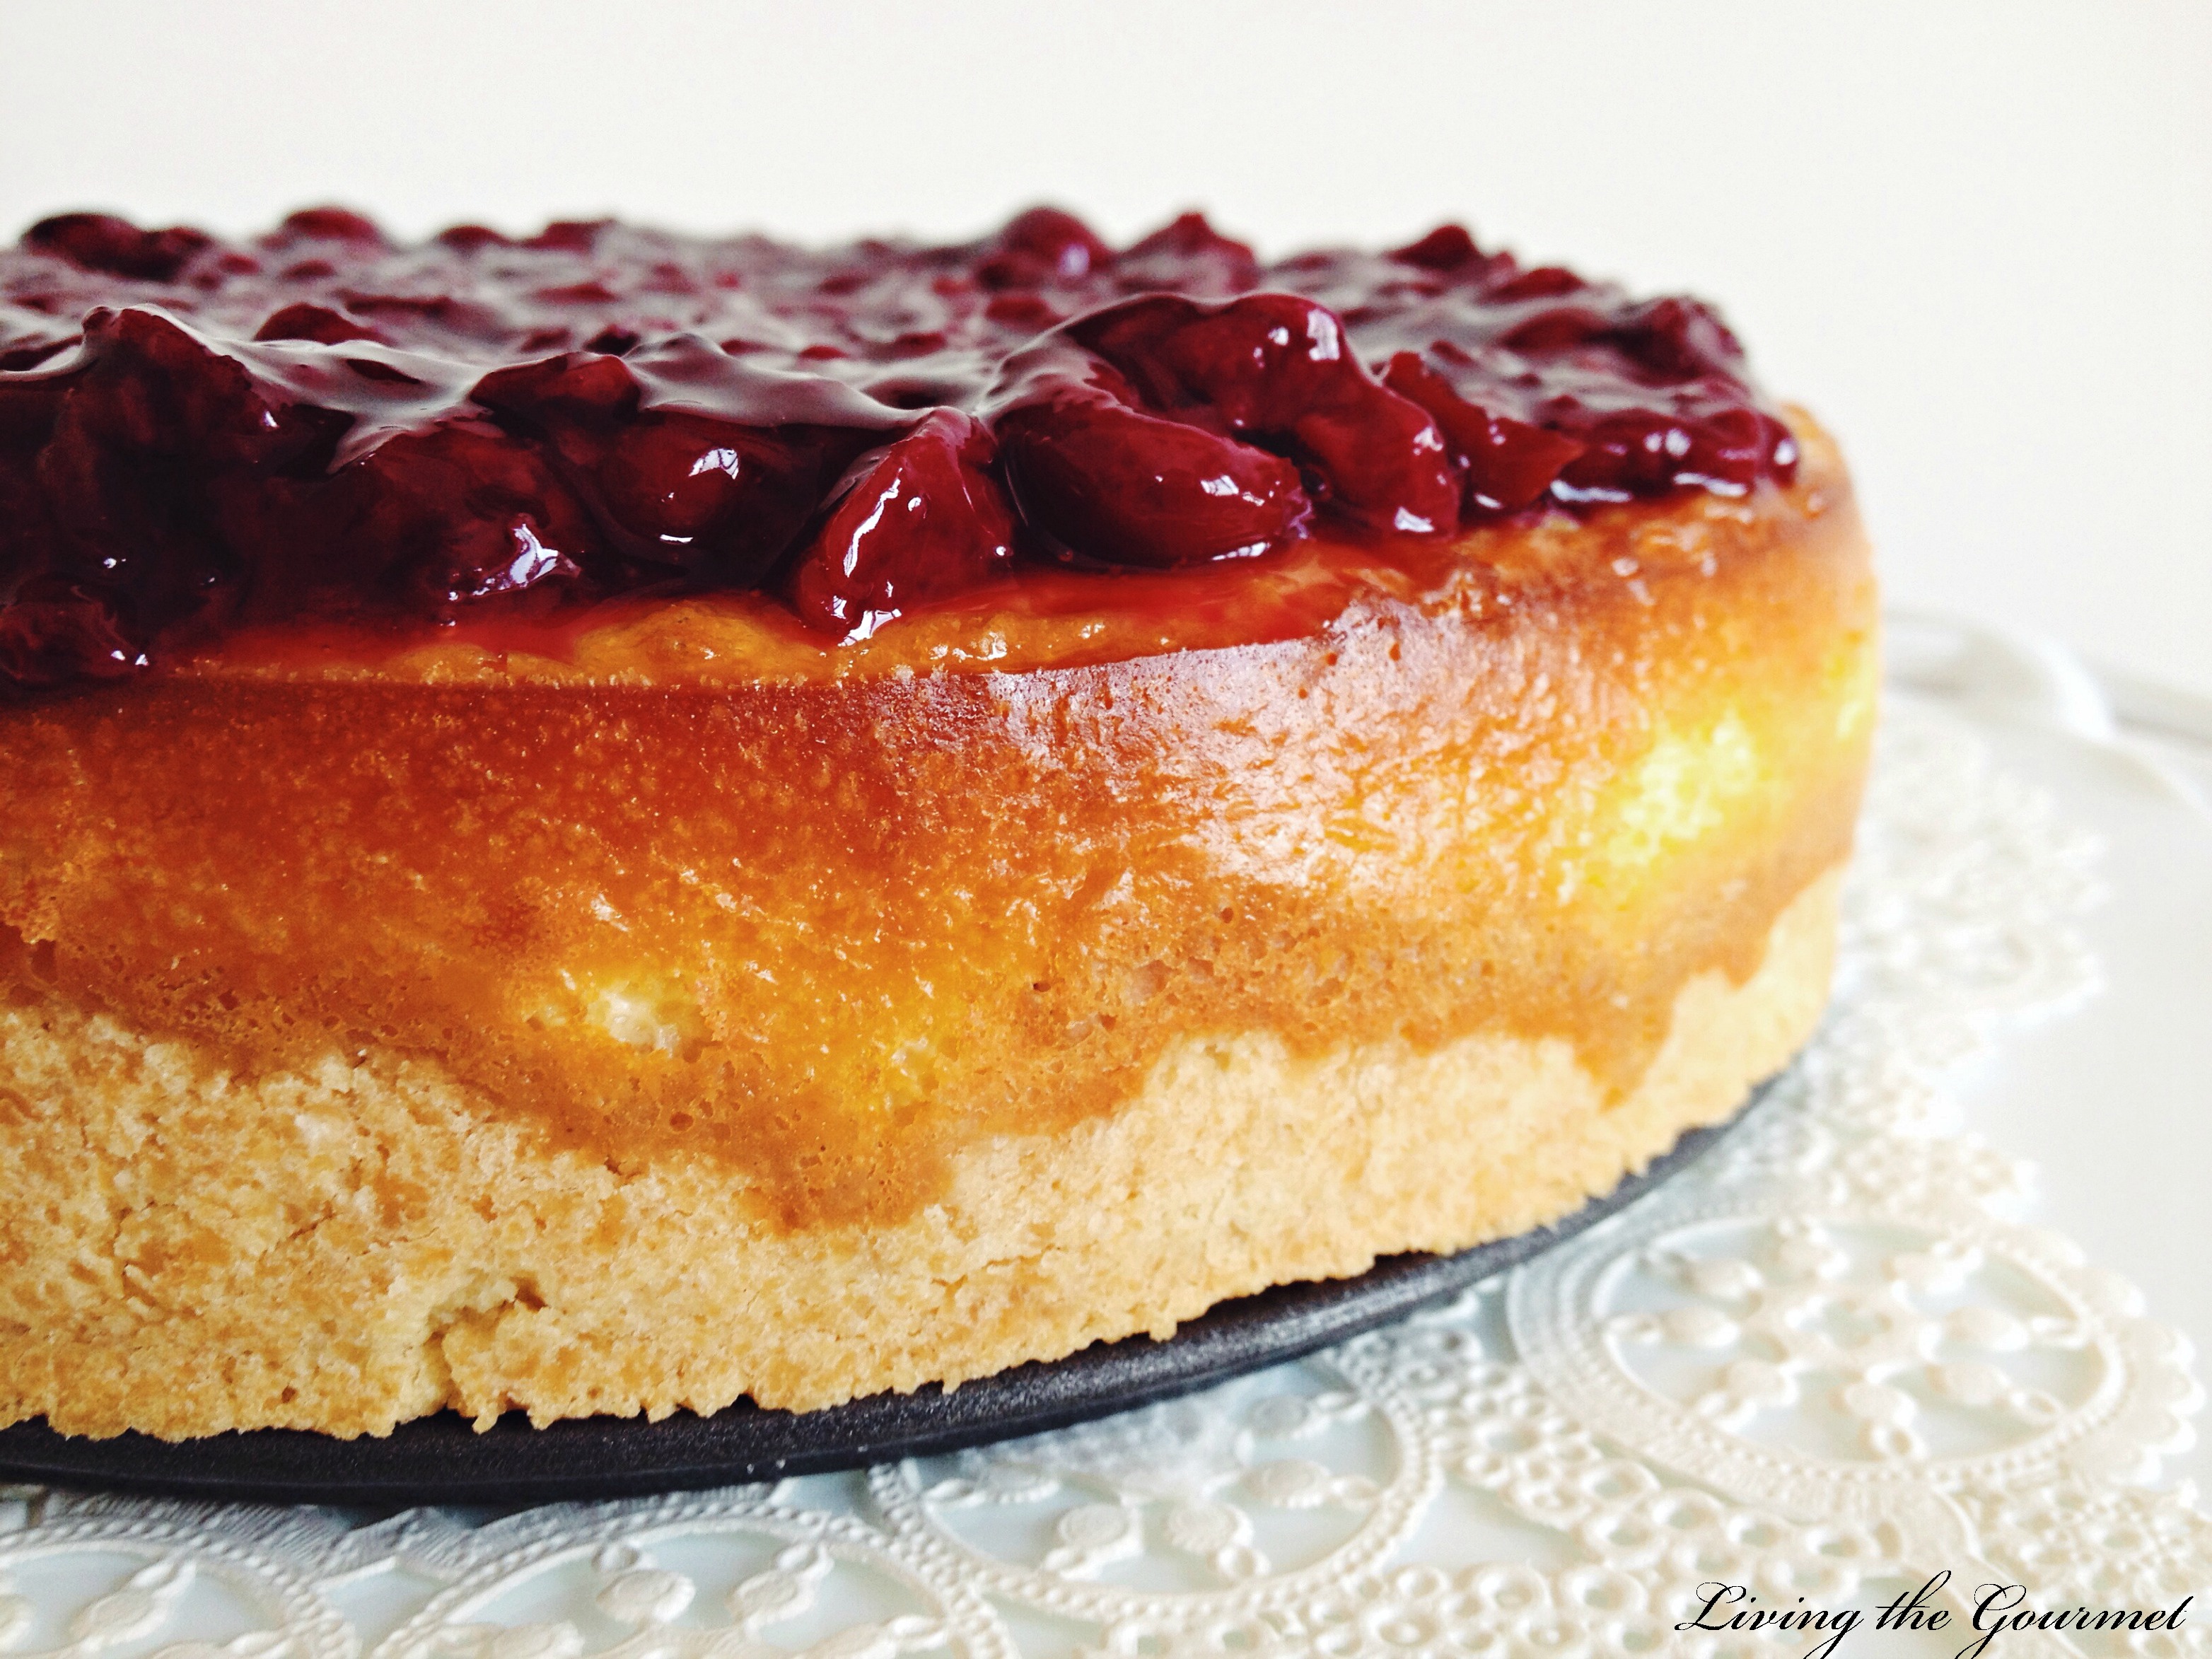 Living the Gourmet: Ricotta Cheesecake with Shortbread Crust & Sour Cherry Topping